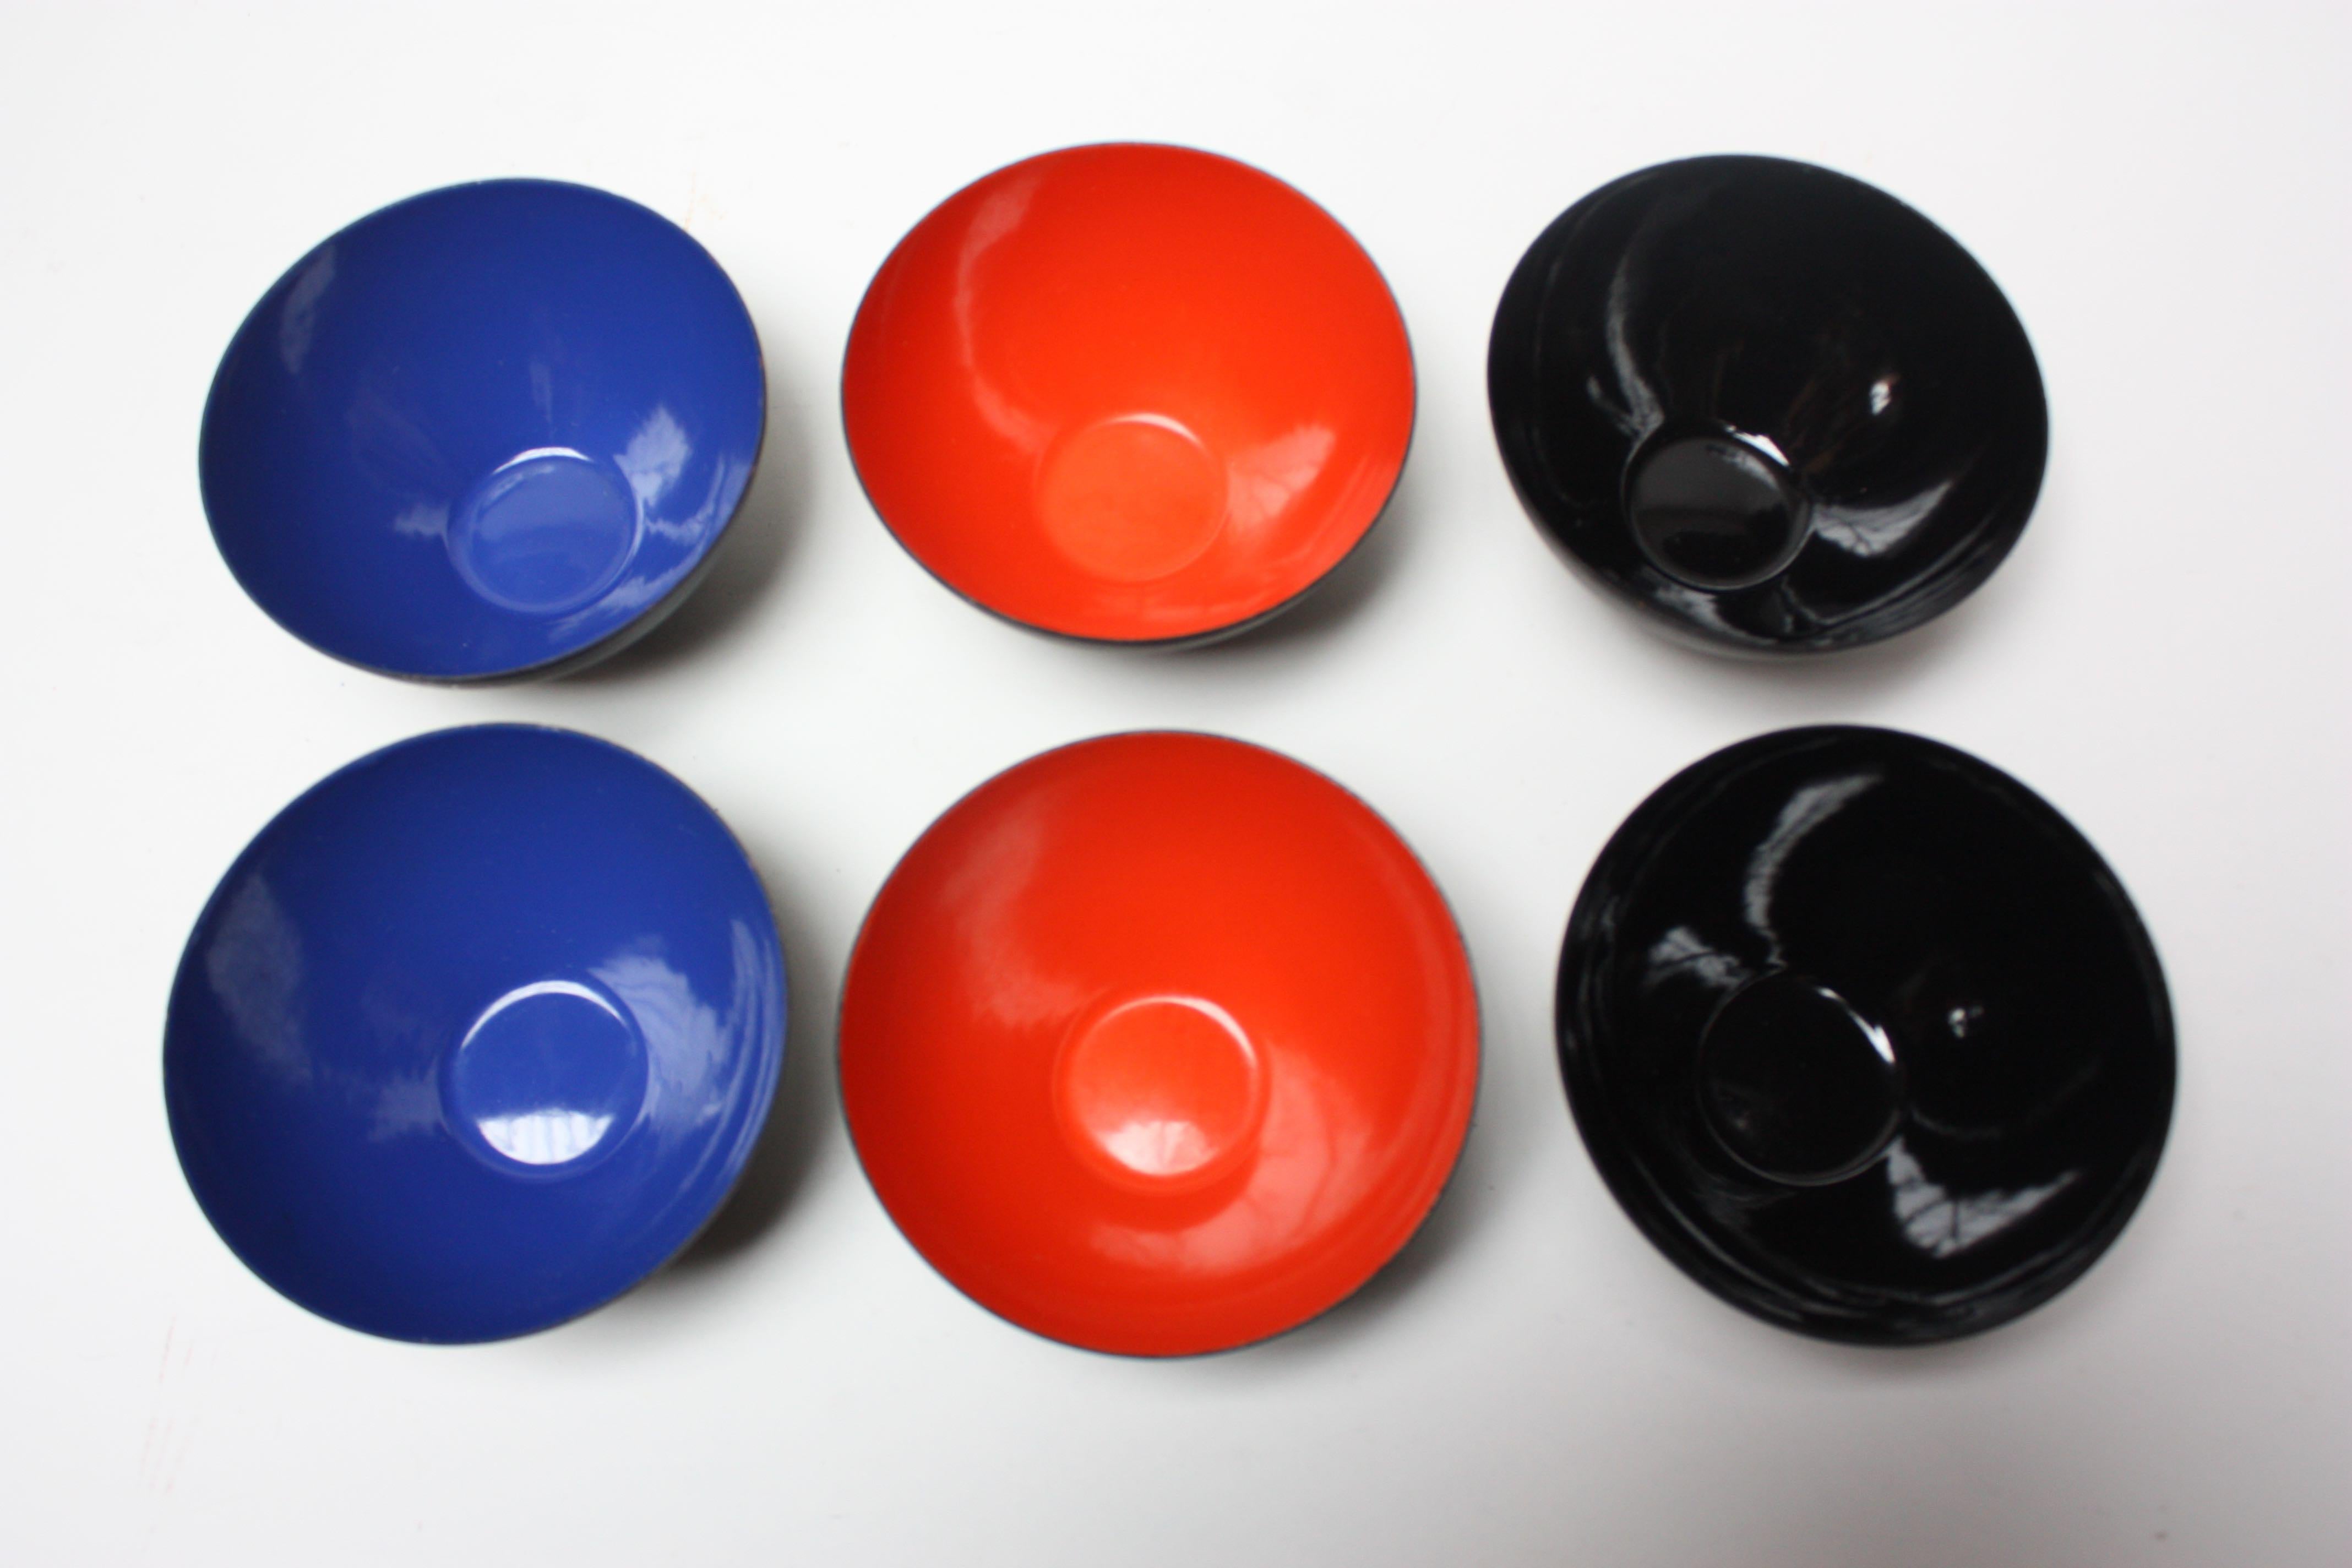 Set of six 1970s Krenit snack bowls by Herbert Krenchel. Black metal with blue, black and orange enamel interiors. (Set comes as two of each color.)
Small size (5